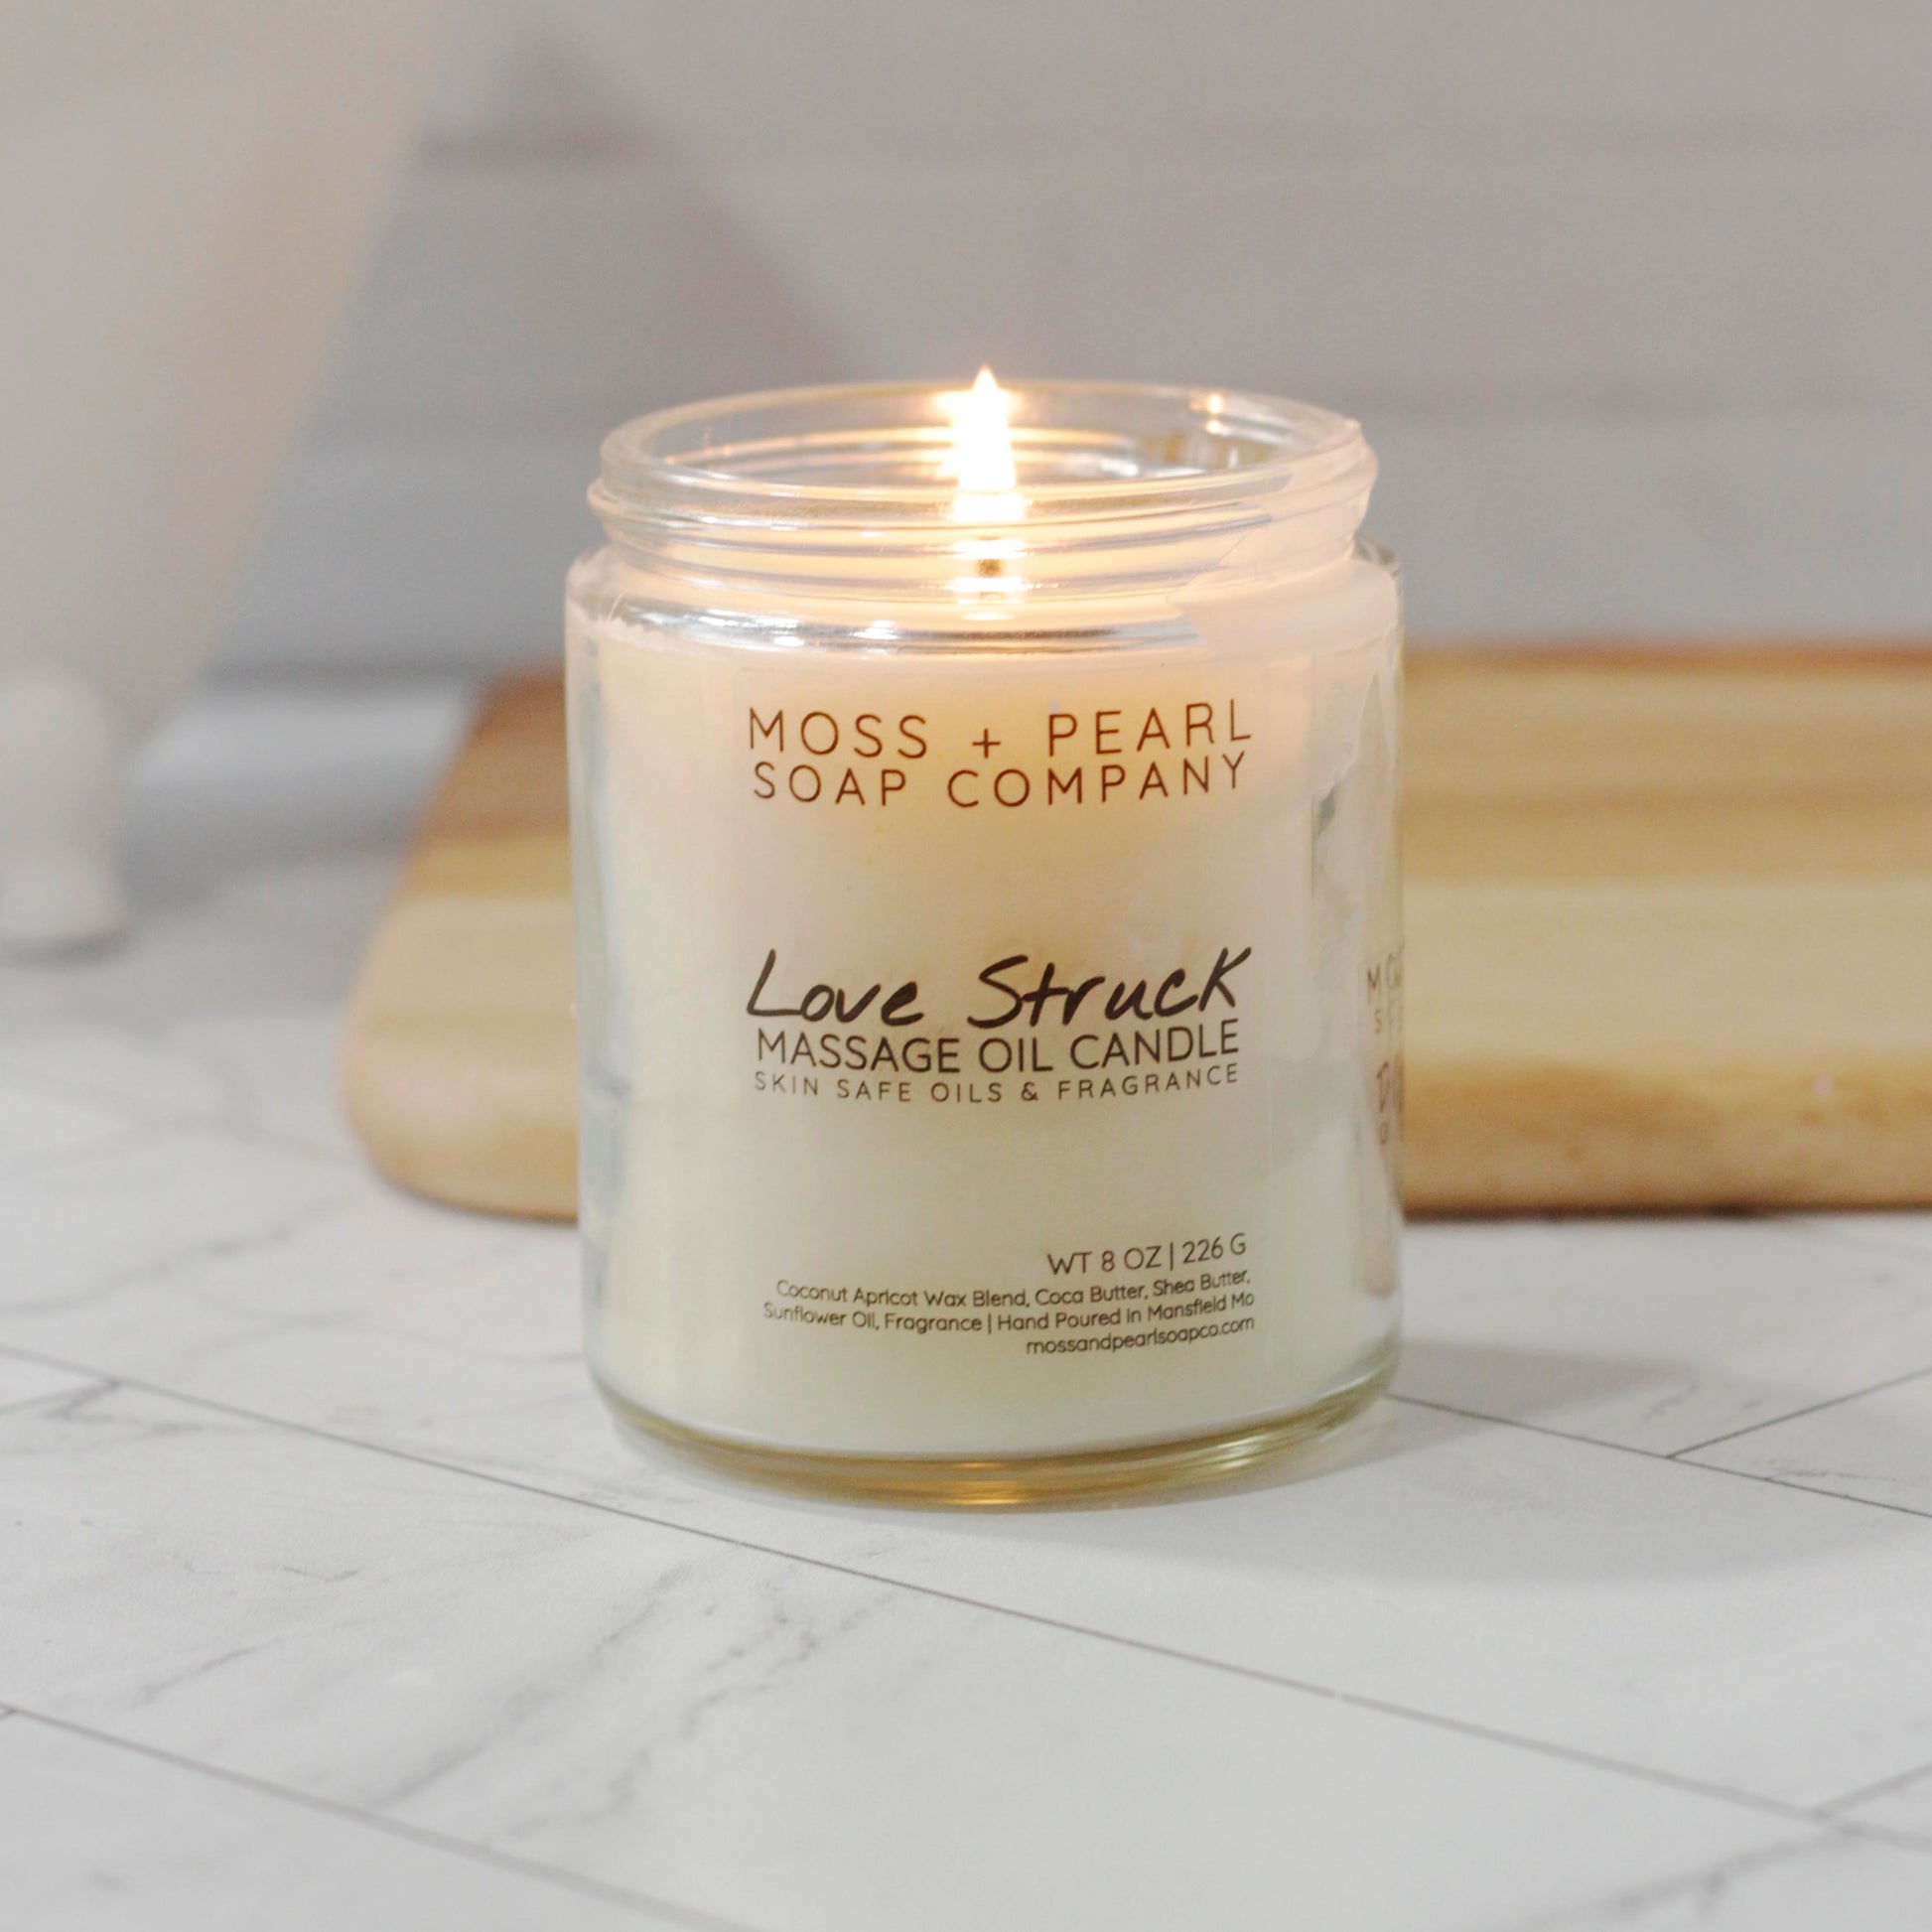 LOVE STRUCK MASSAGE OIL CANDLE Moss + Pearl Soap Company